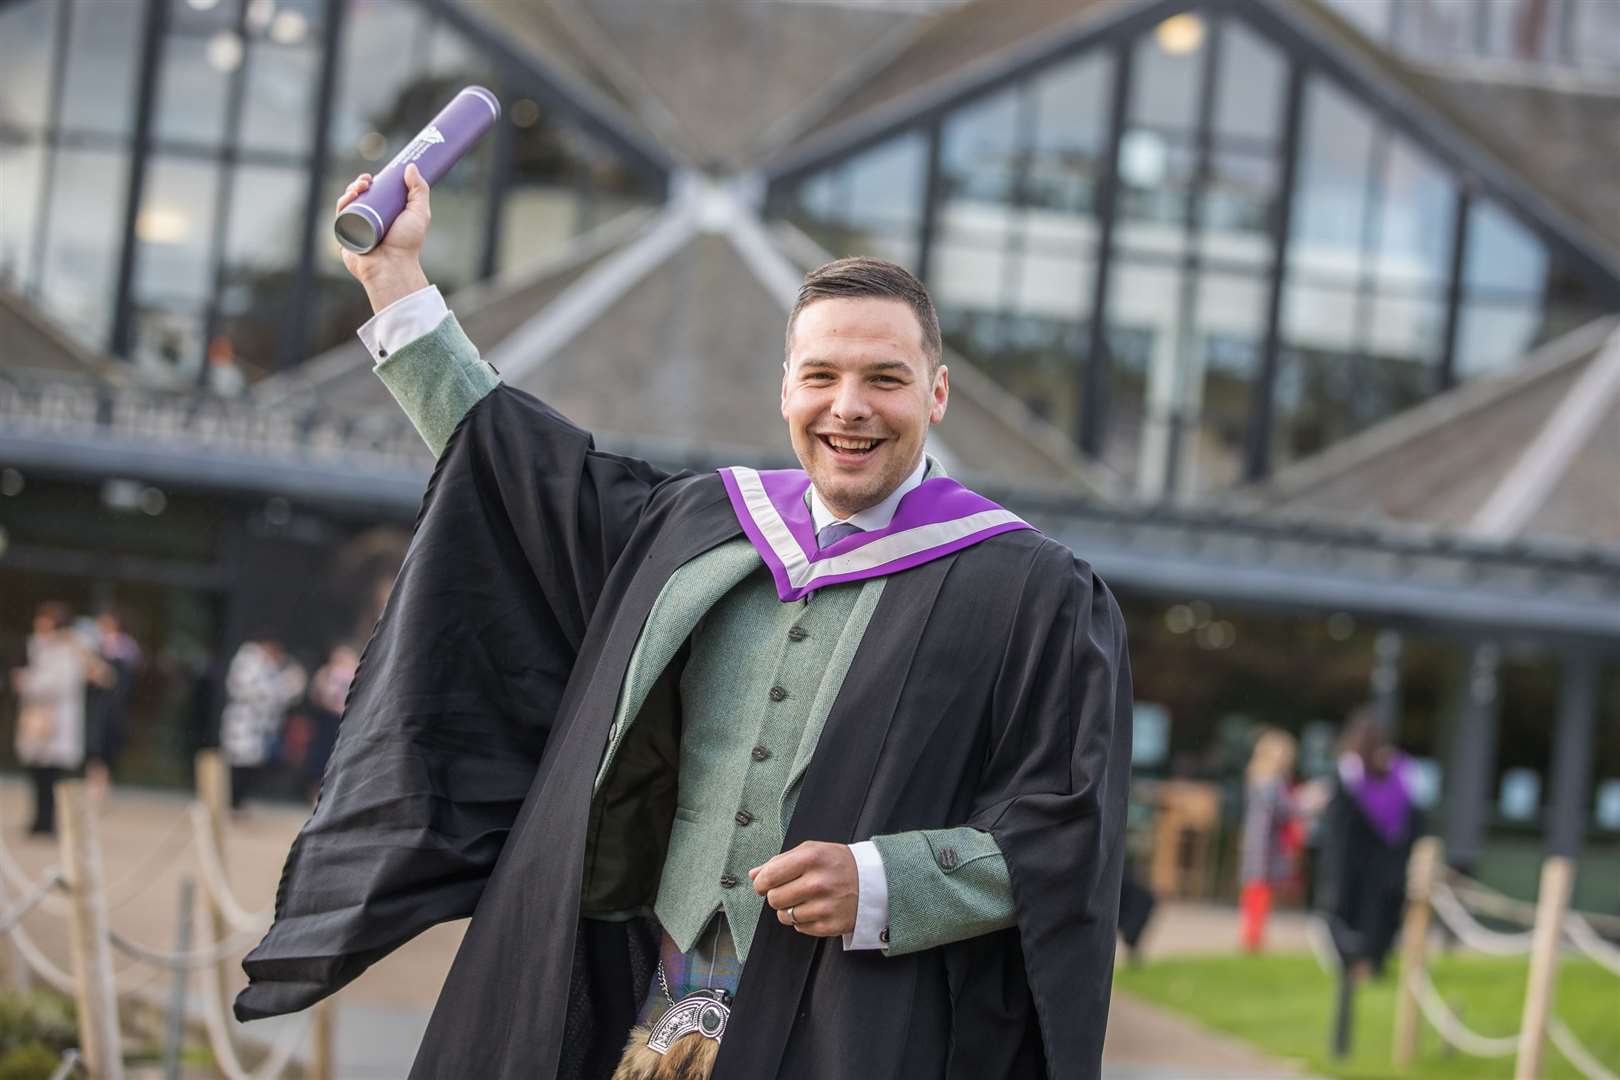 The report also suggested that the 12,360 people who qualified from the University in 2019 will generate an estimated lifetime earnings premium of £324 million to the economy of the Highlands and Islands, Moray and Perthshire.